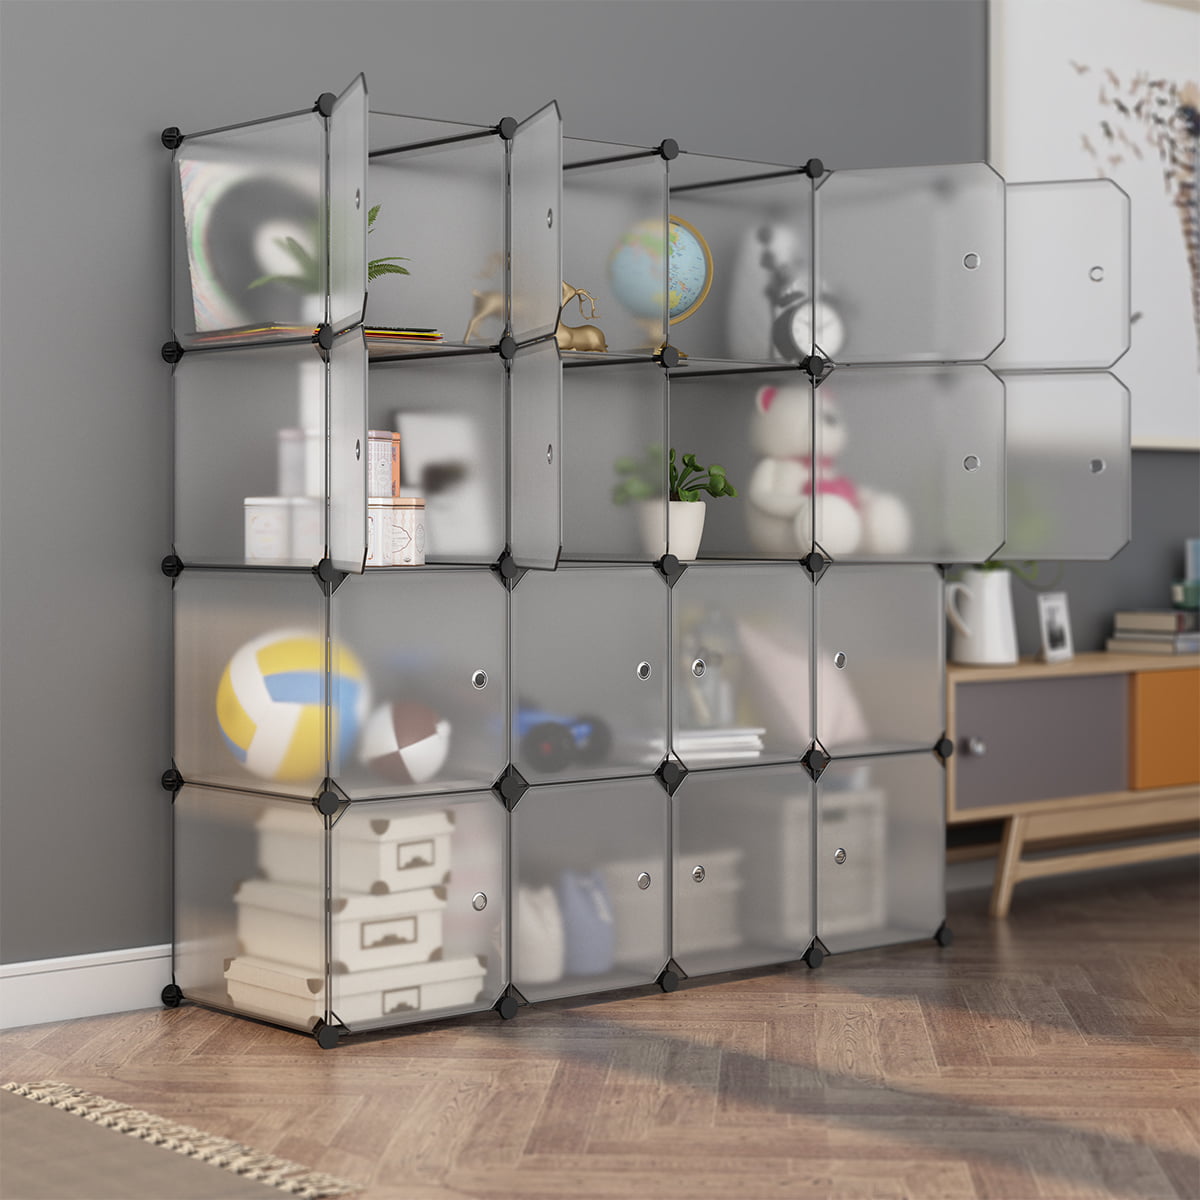 Dropship 20 Cube Organizer Stackable Plastic Cube Storage Shelves Design  Multifunctional Modular Closet Cabinet With Hanging Rod RT to Sell Online  at a Lower Price